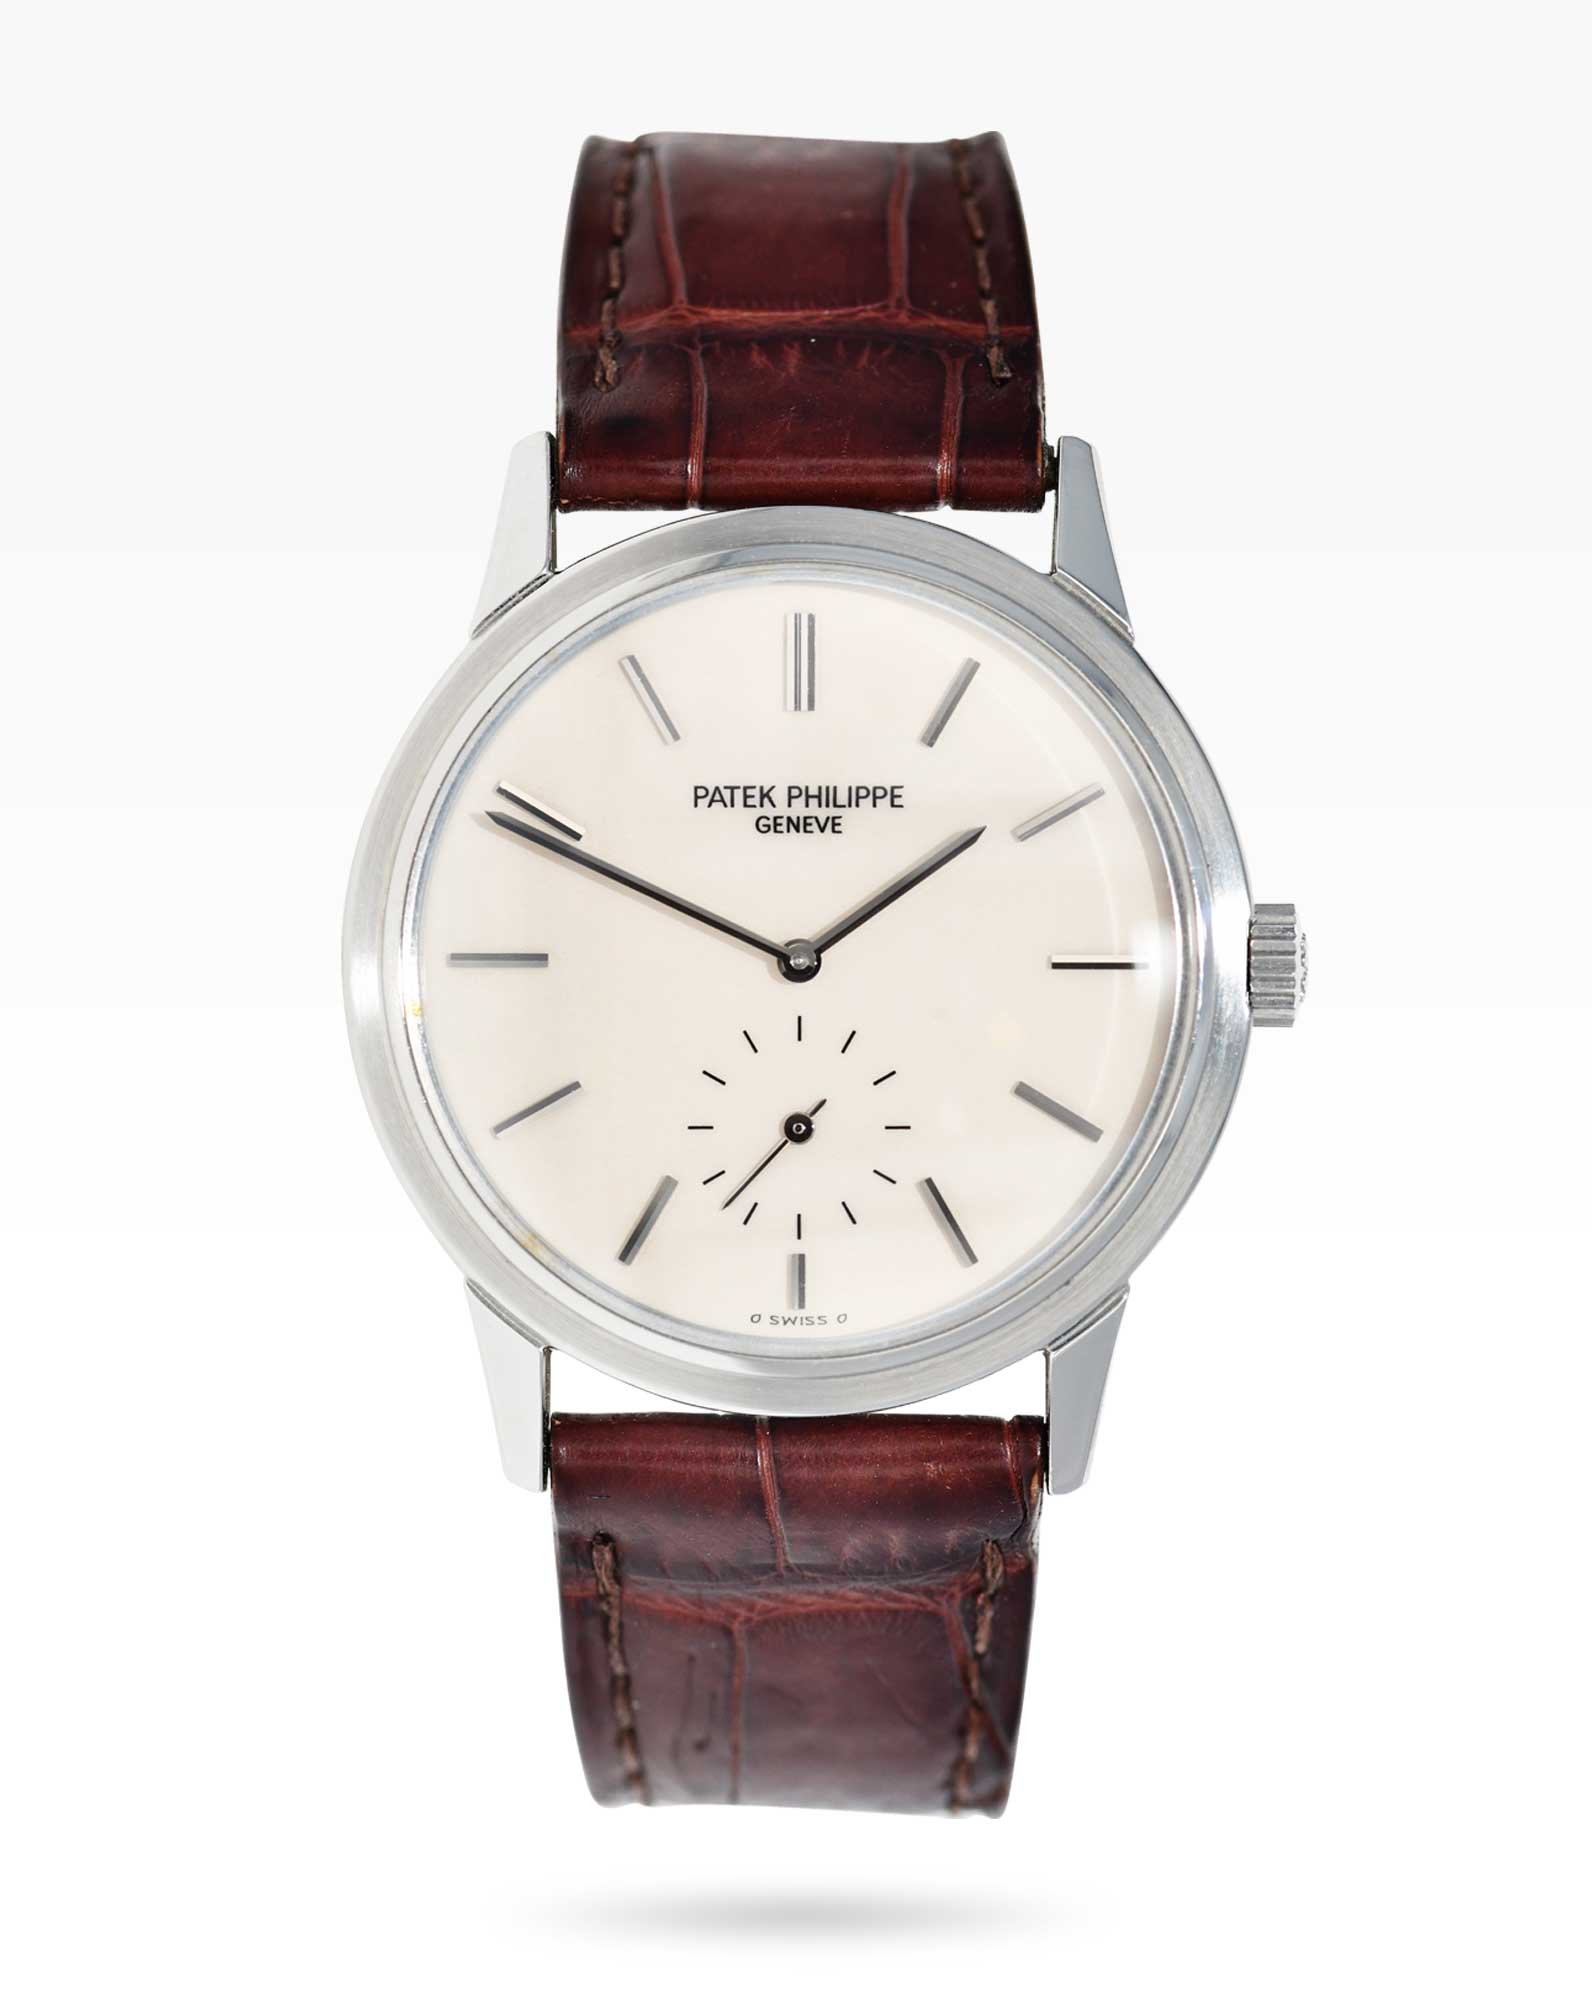 Limited production vintage Patek Philippe Calatrava Ref.3718A Steel 150th Anniversary Commemorative Dress Watch from 1989. Only at 2ToneVintage Watches.